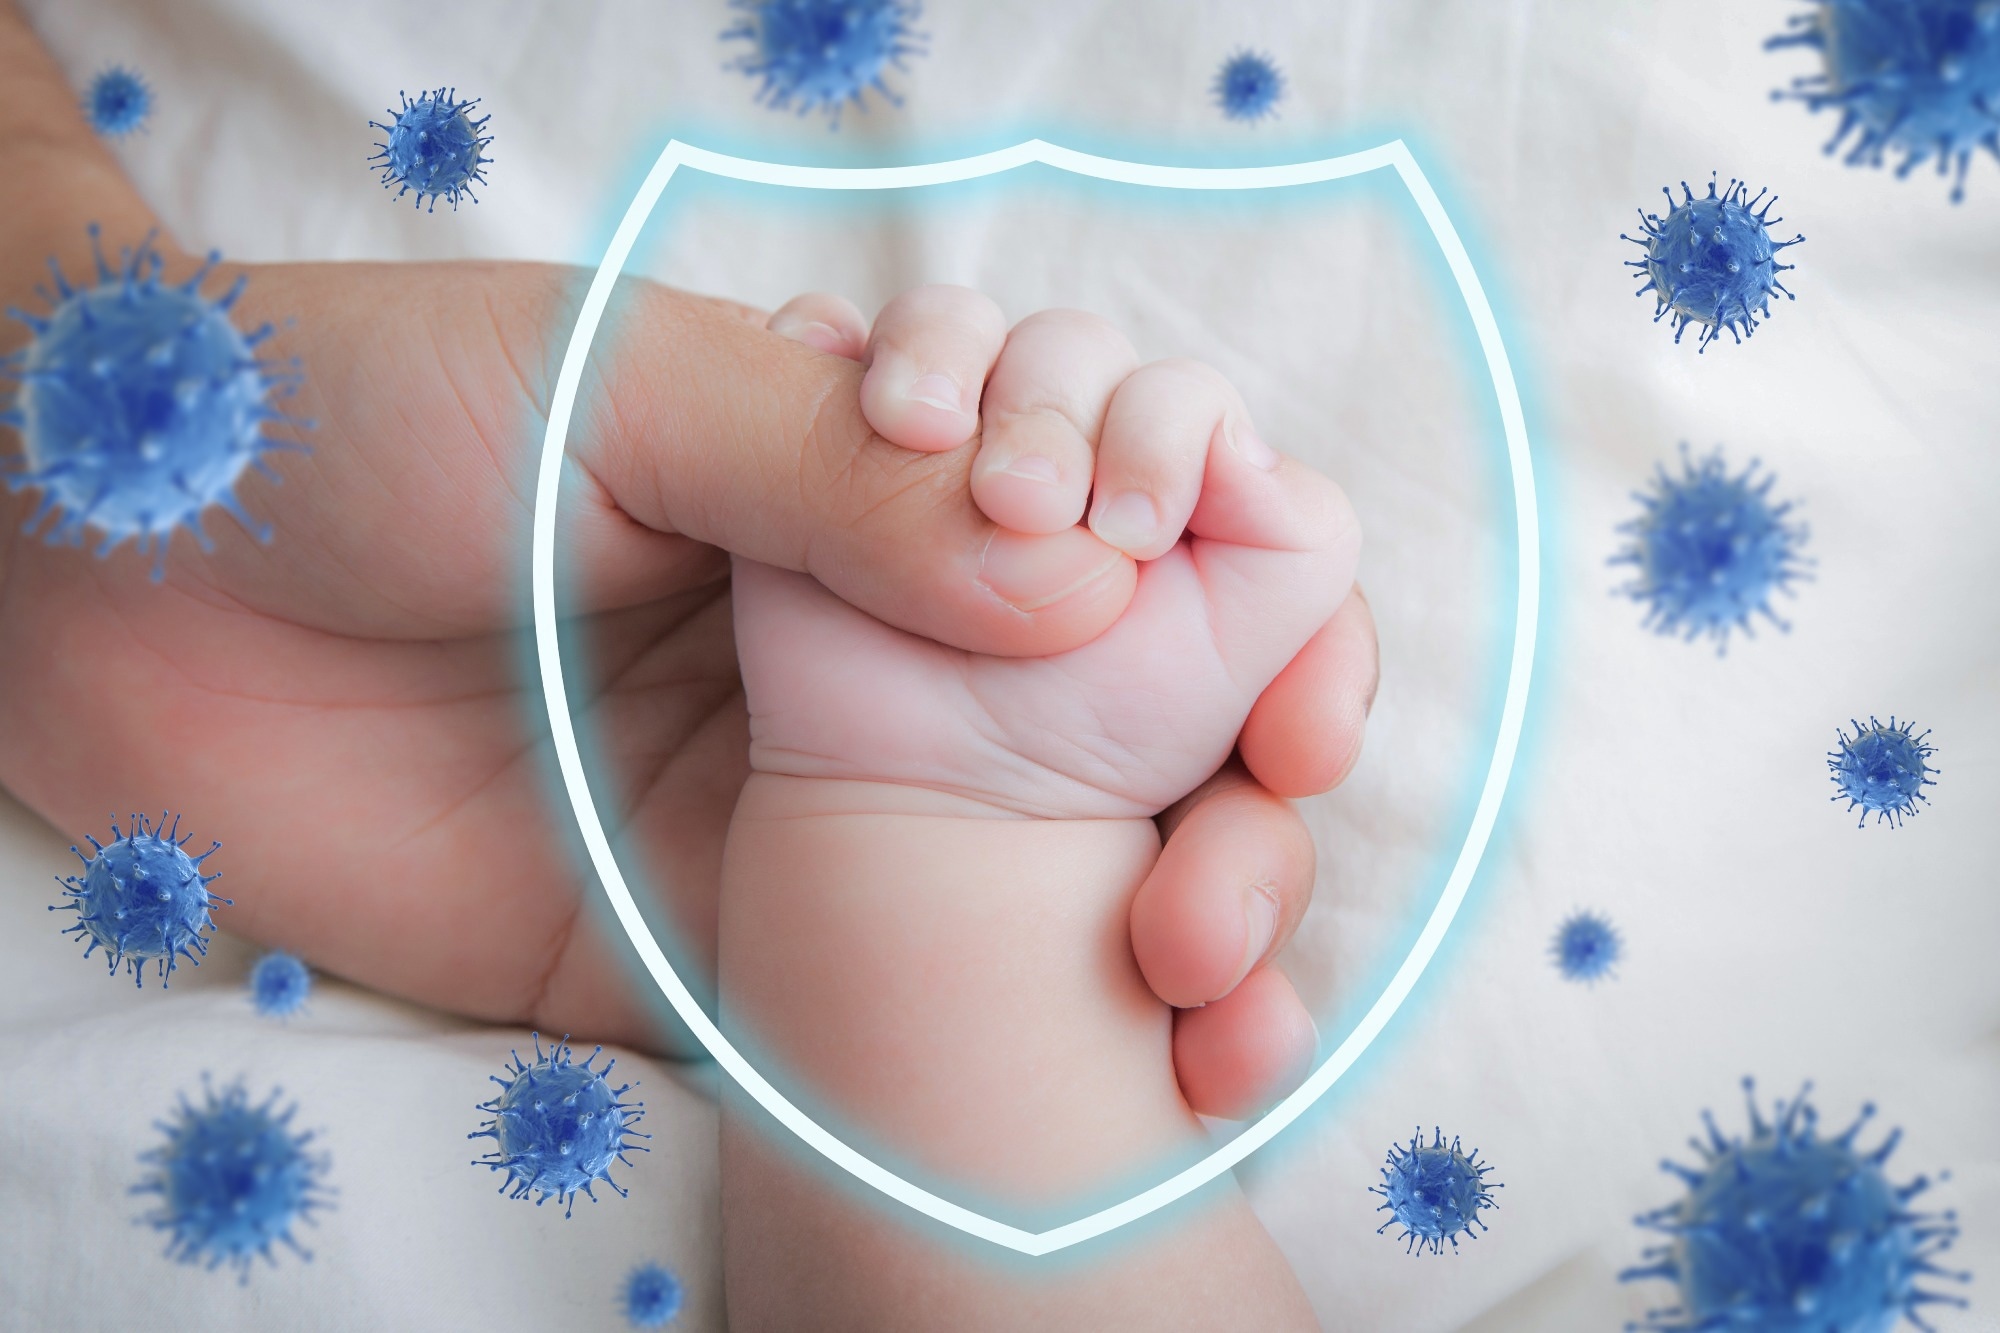 Study: Delayed gut microbiota maturation in the first year of life is a hallmark of pediatric allergic disease. Image Credit: PhonlamaiPhoto/Shutterstock.com